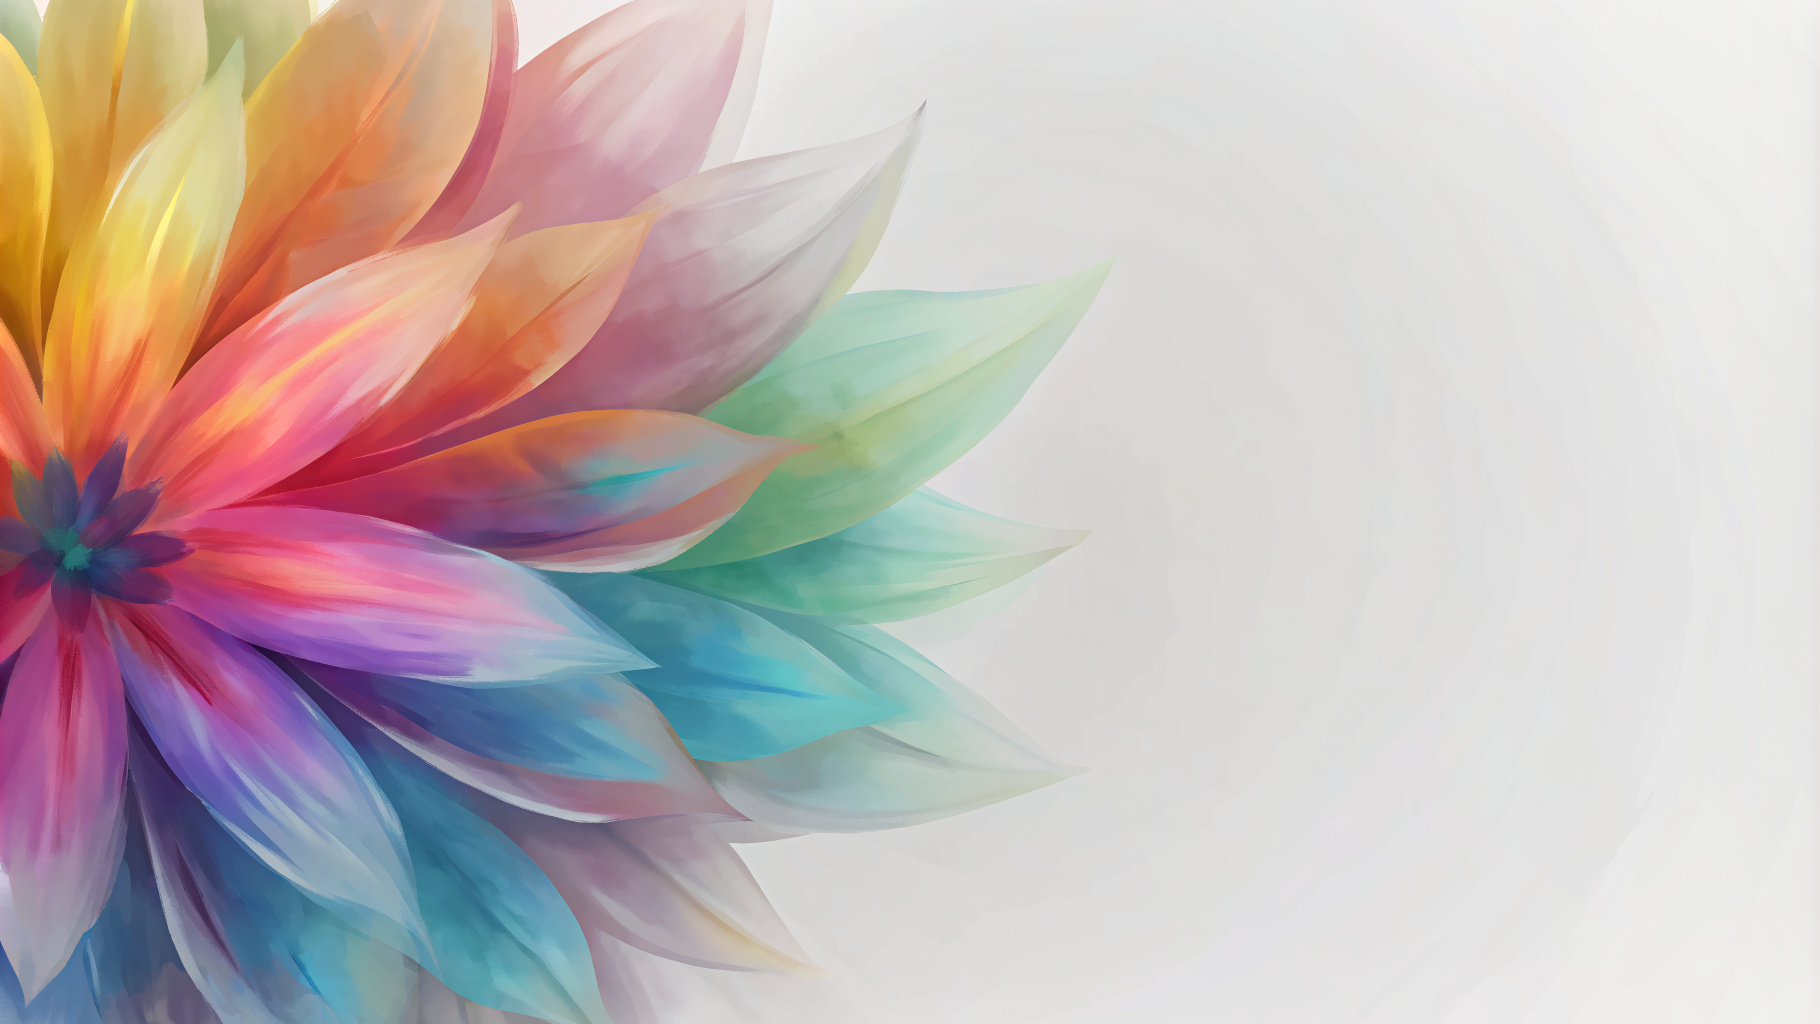 digital painting of abstract colorful flower in corner on white background. with blank area for text